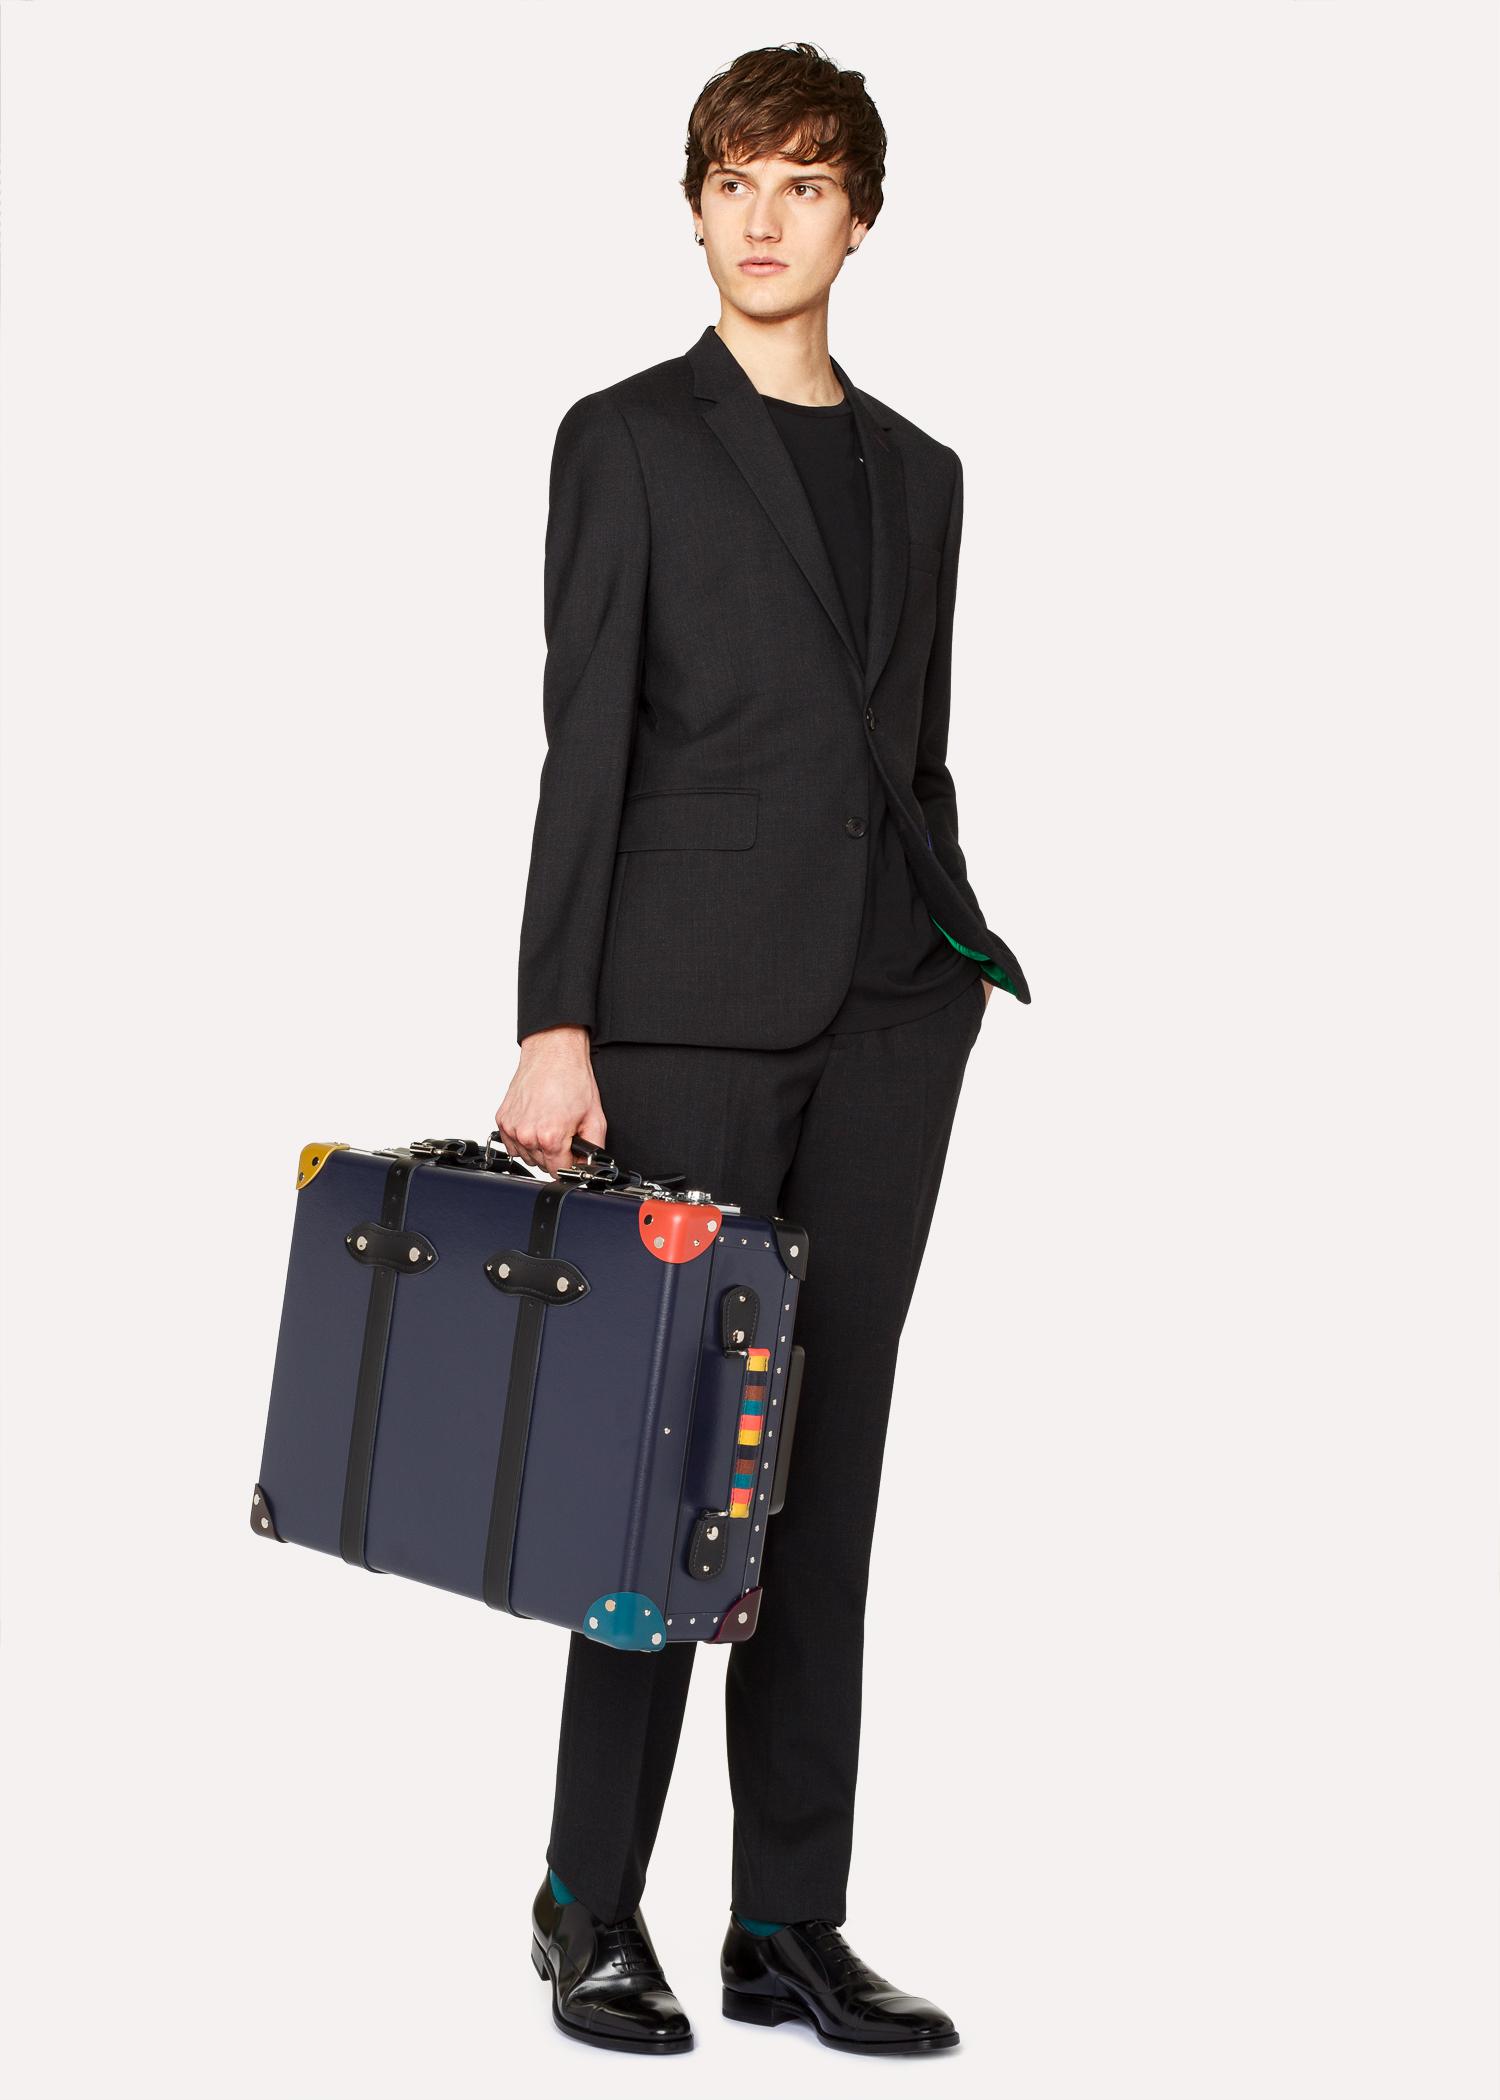 Paul Smith Leather Globe-Trotter x Trolley Case - Signed Limited Edition in  Blue for Men - Lyst